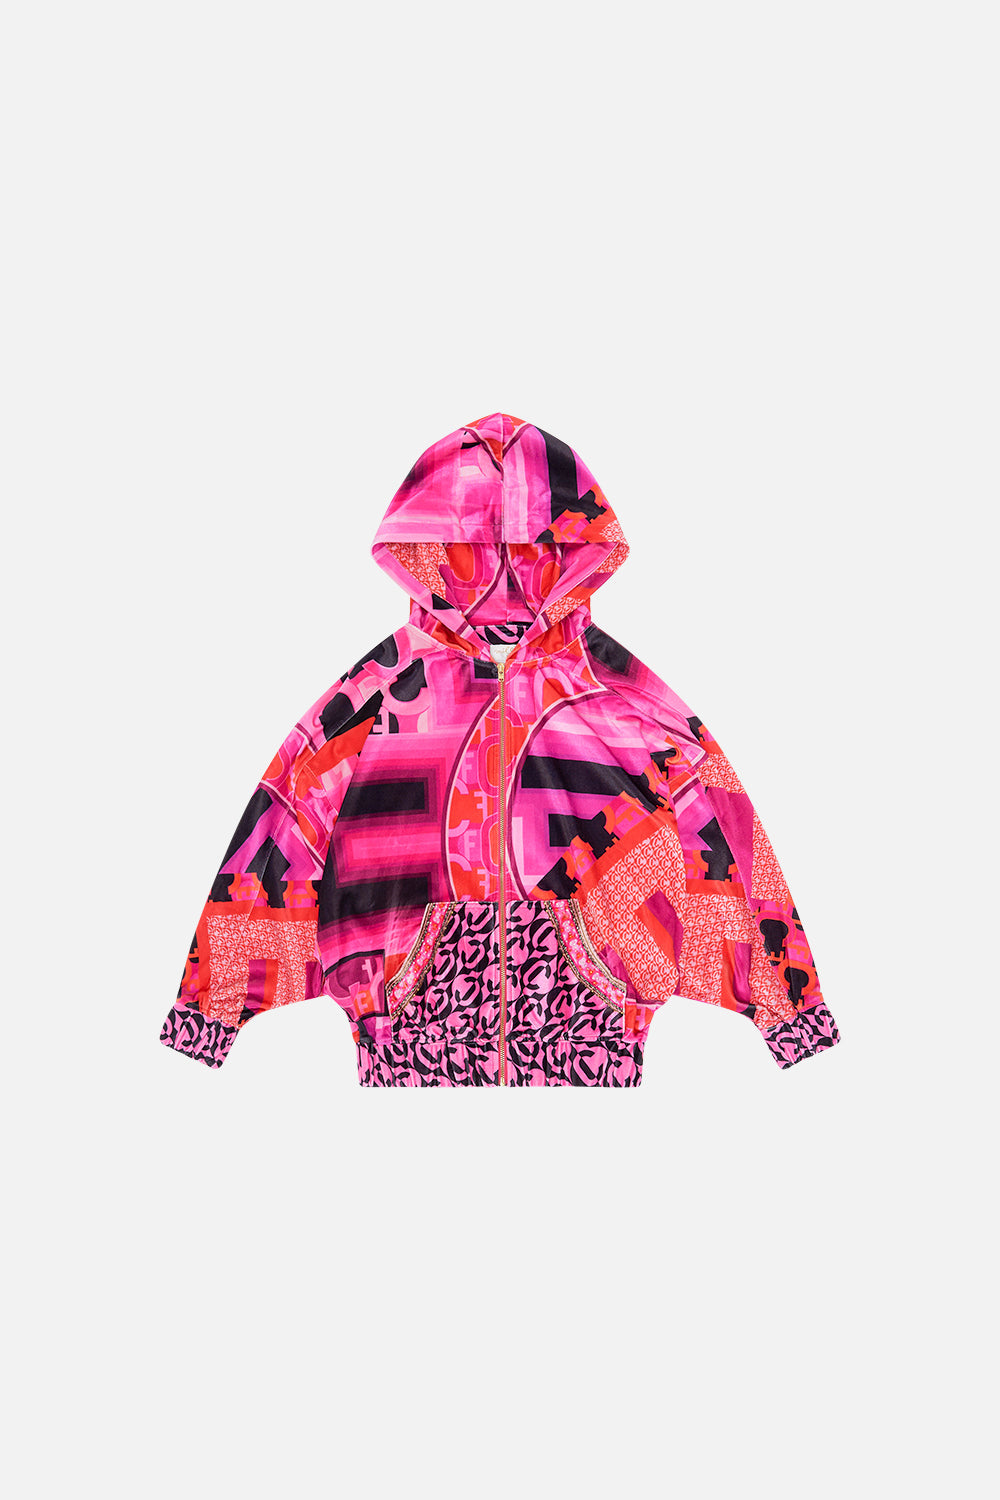 Product view of MILLA BY CAMILLA kids pink jacket in Ciao Palazzo print